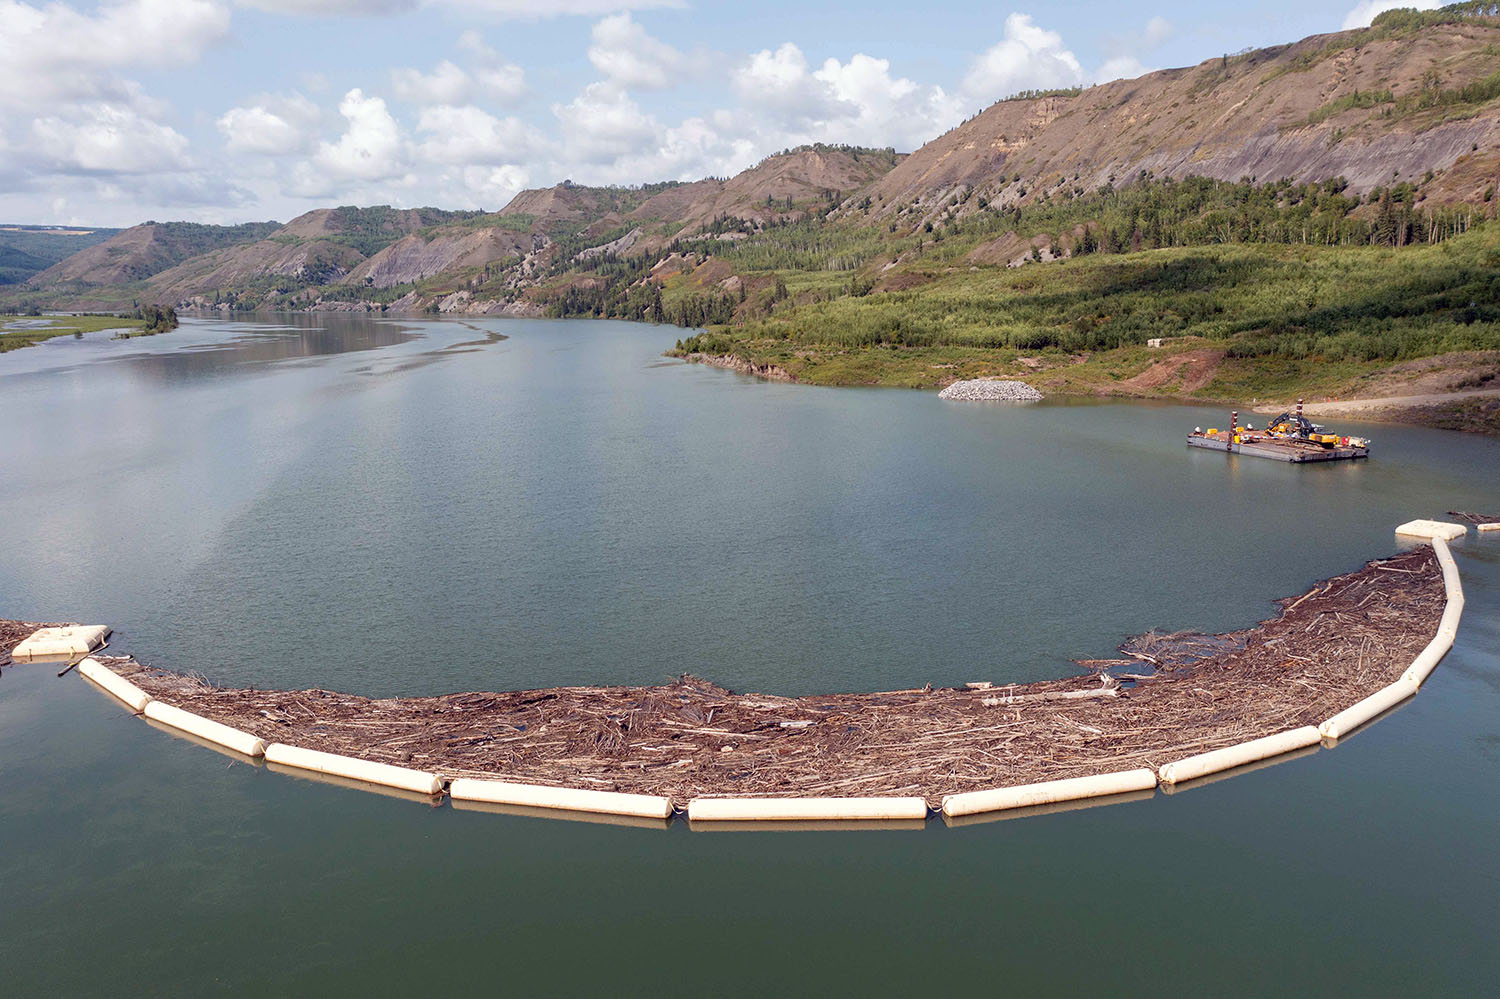 The temporary debris boom catches debris that floats down the river towards the diversion inlet portals. Permanent debris management booms will be installed on the reservoir to stop material flowing into the approach channel. | August 2023